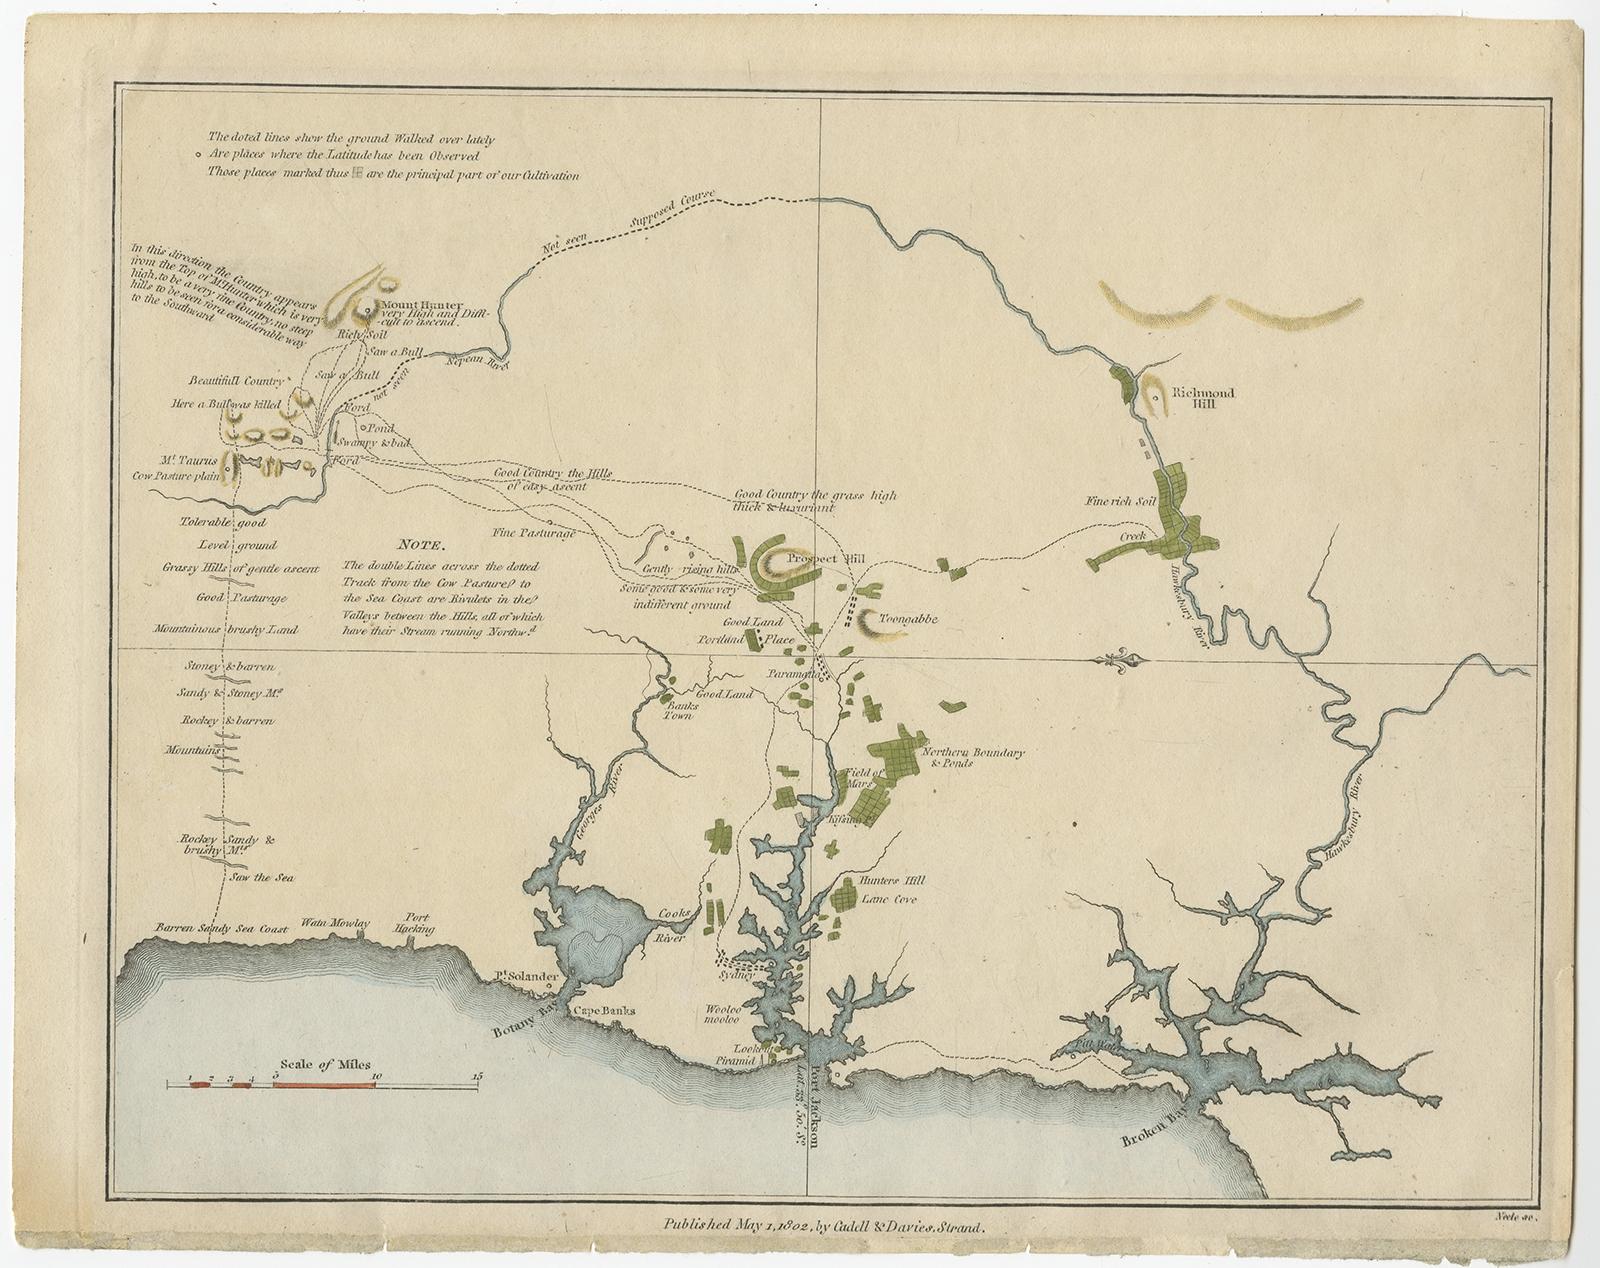 Interesting chart of the three harbours of Botany Bay, Port Jackson, and Broken Bay showing the ground cultivated by the colonists. In the early days of the settlement in Australia there was a prime importance to establish sufficient even abundent